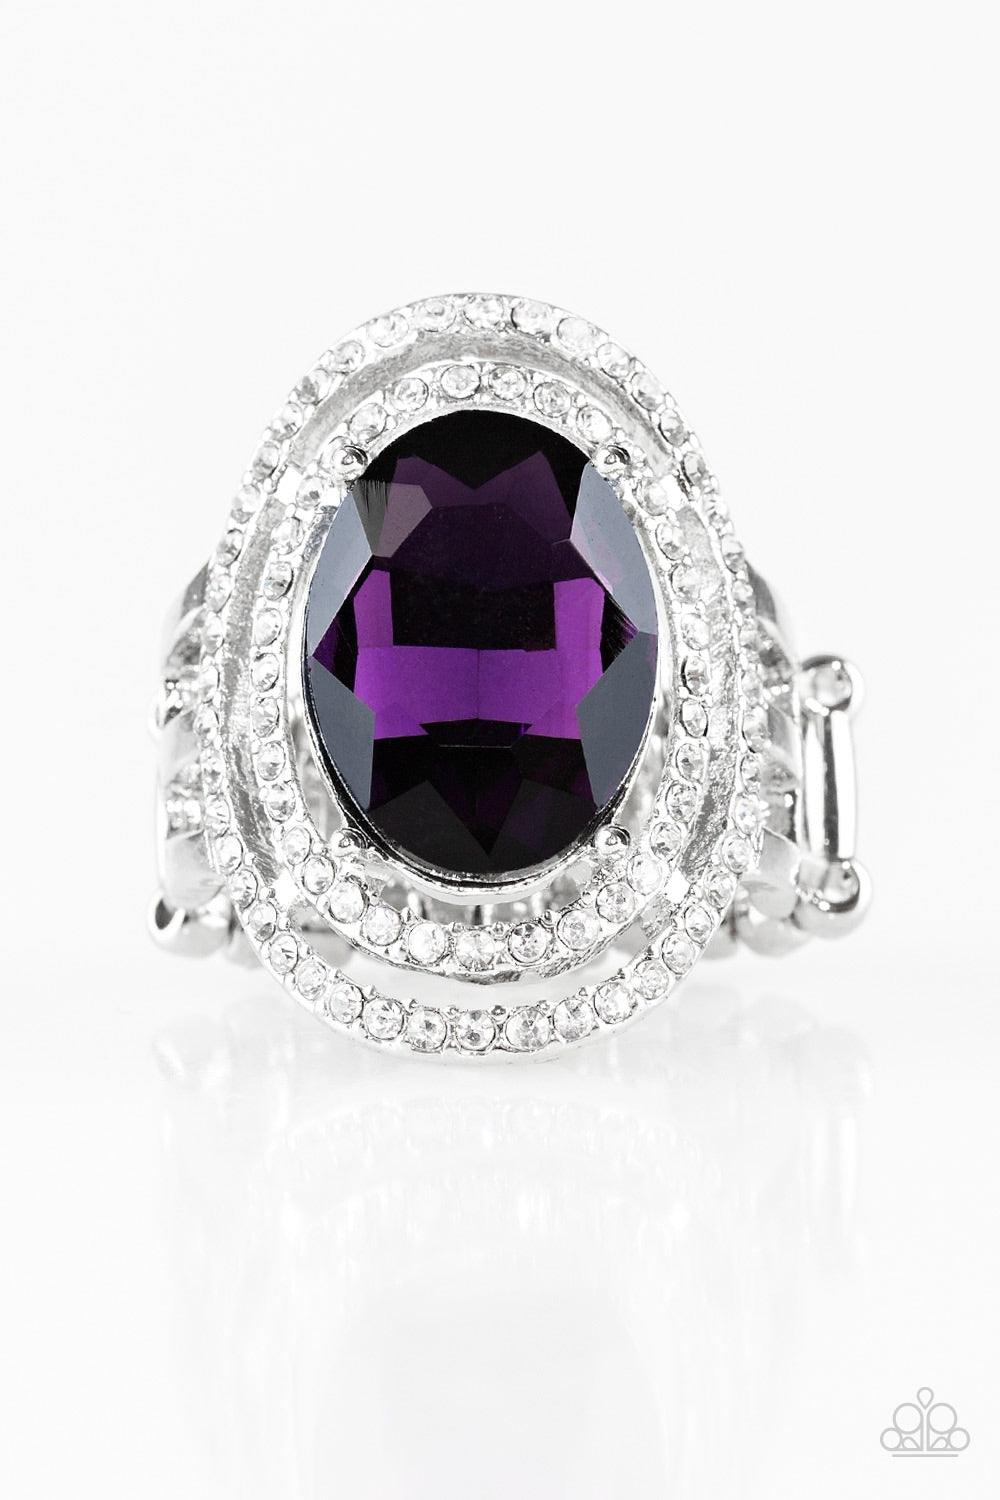 Paparazzi Accessories Making History - Purple A glittery purple gem sits atop stacked silver frames radiating with glassy white rhinestones for a timeless look. Features a stretchy band for a flexible fit. Jewelry